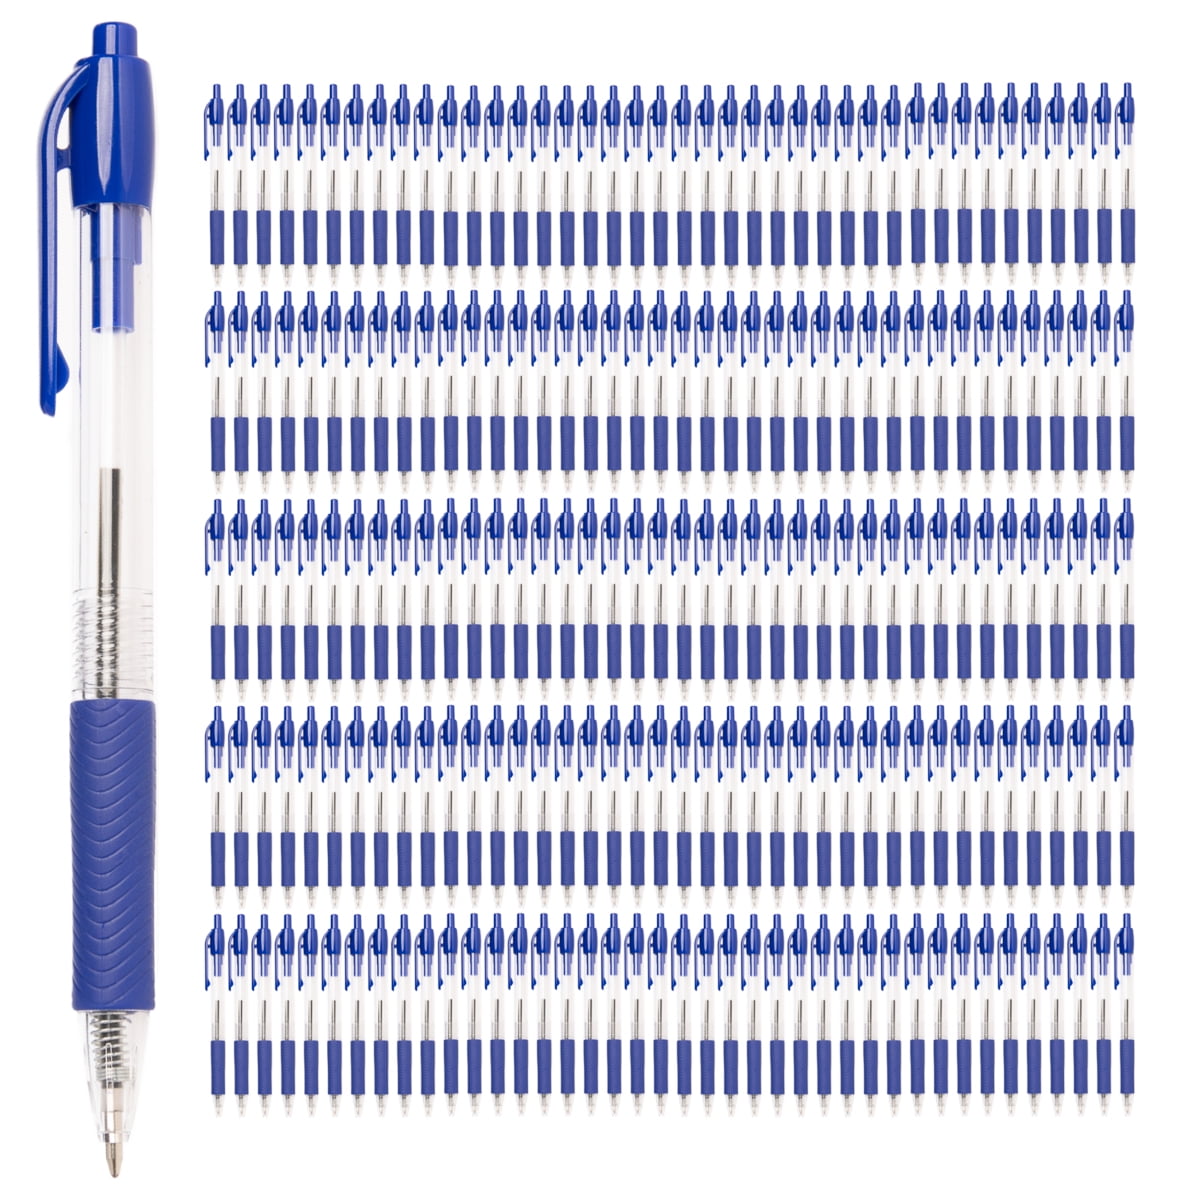 Eaasty 100 Pieces Pens Bulk Long Retractable Ballpoint Pen 0.7 mm Medium  Point Click Black Ink Pen Gel Pens Smooth Writing Pens with Clip for  Journal